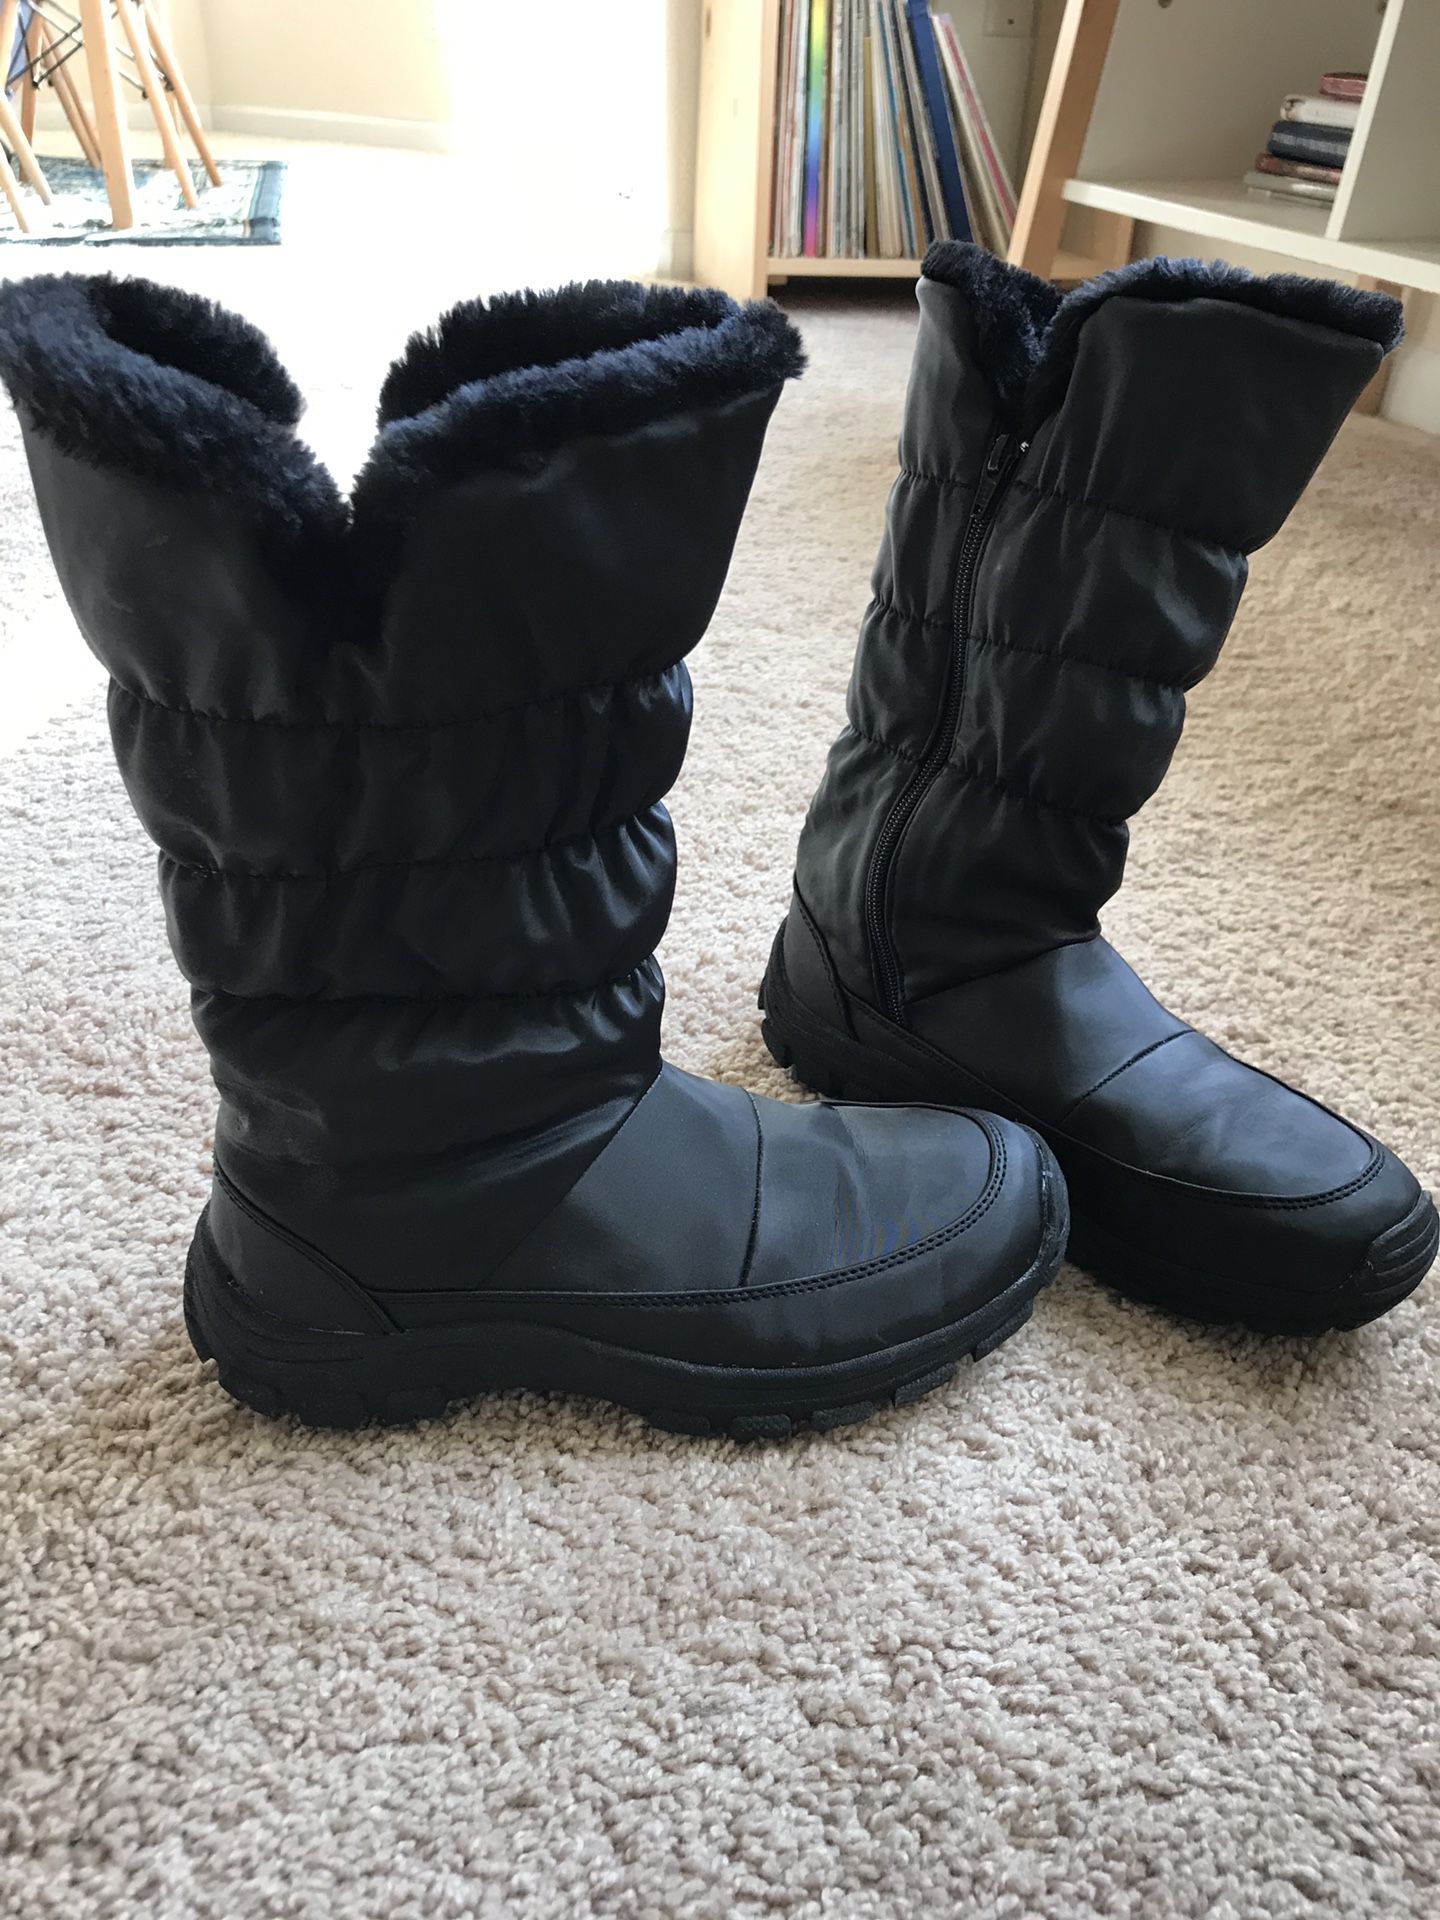 Womens Size 7 Snow Boots